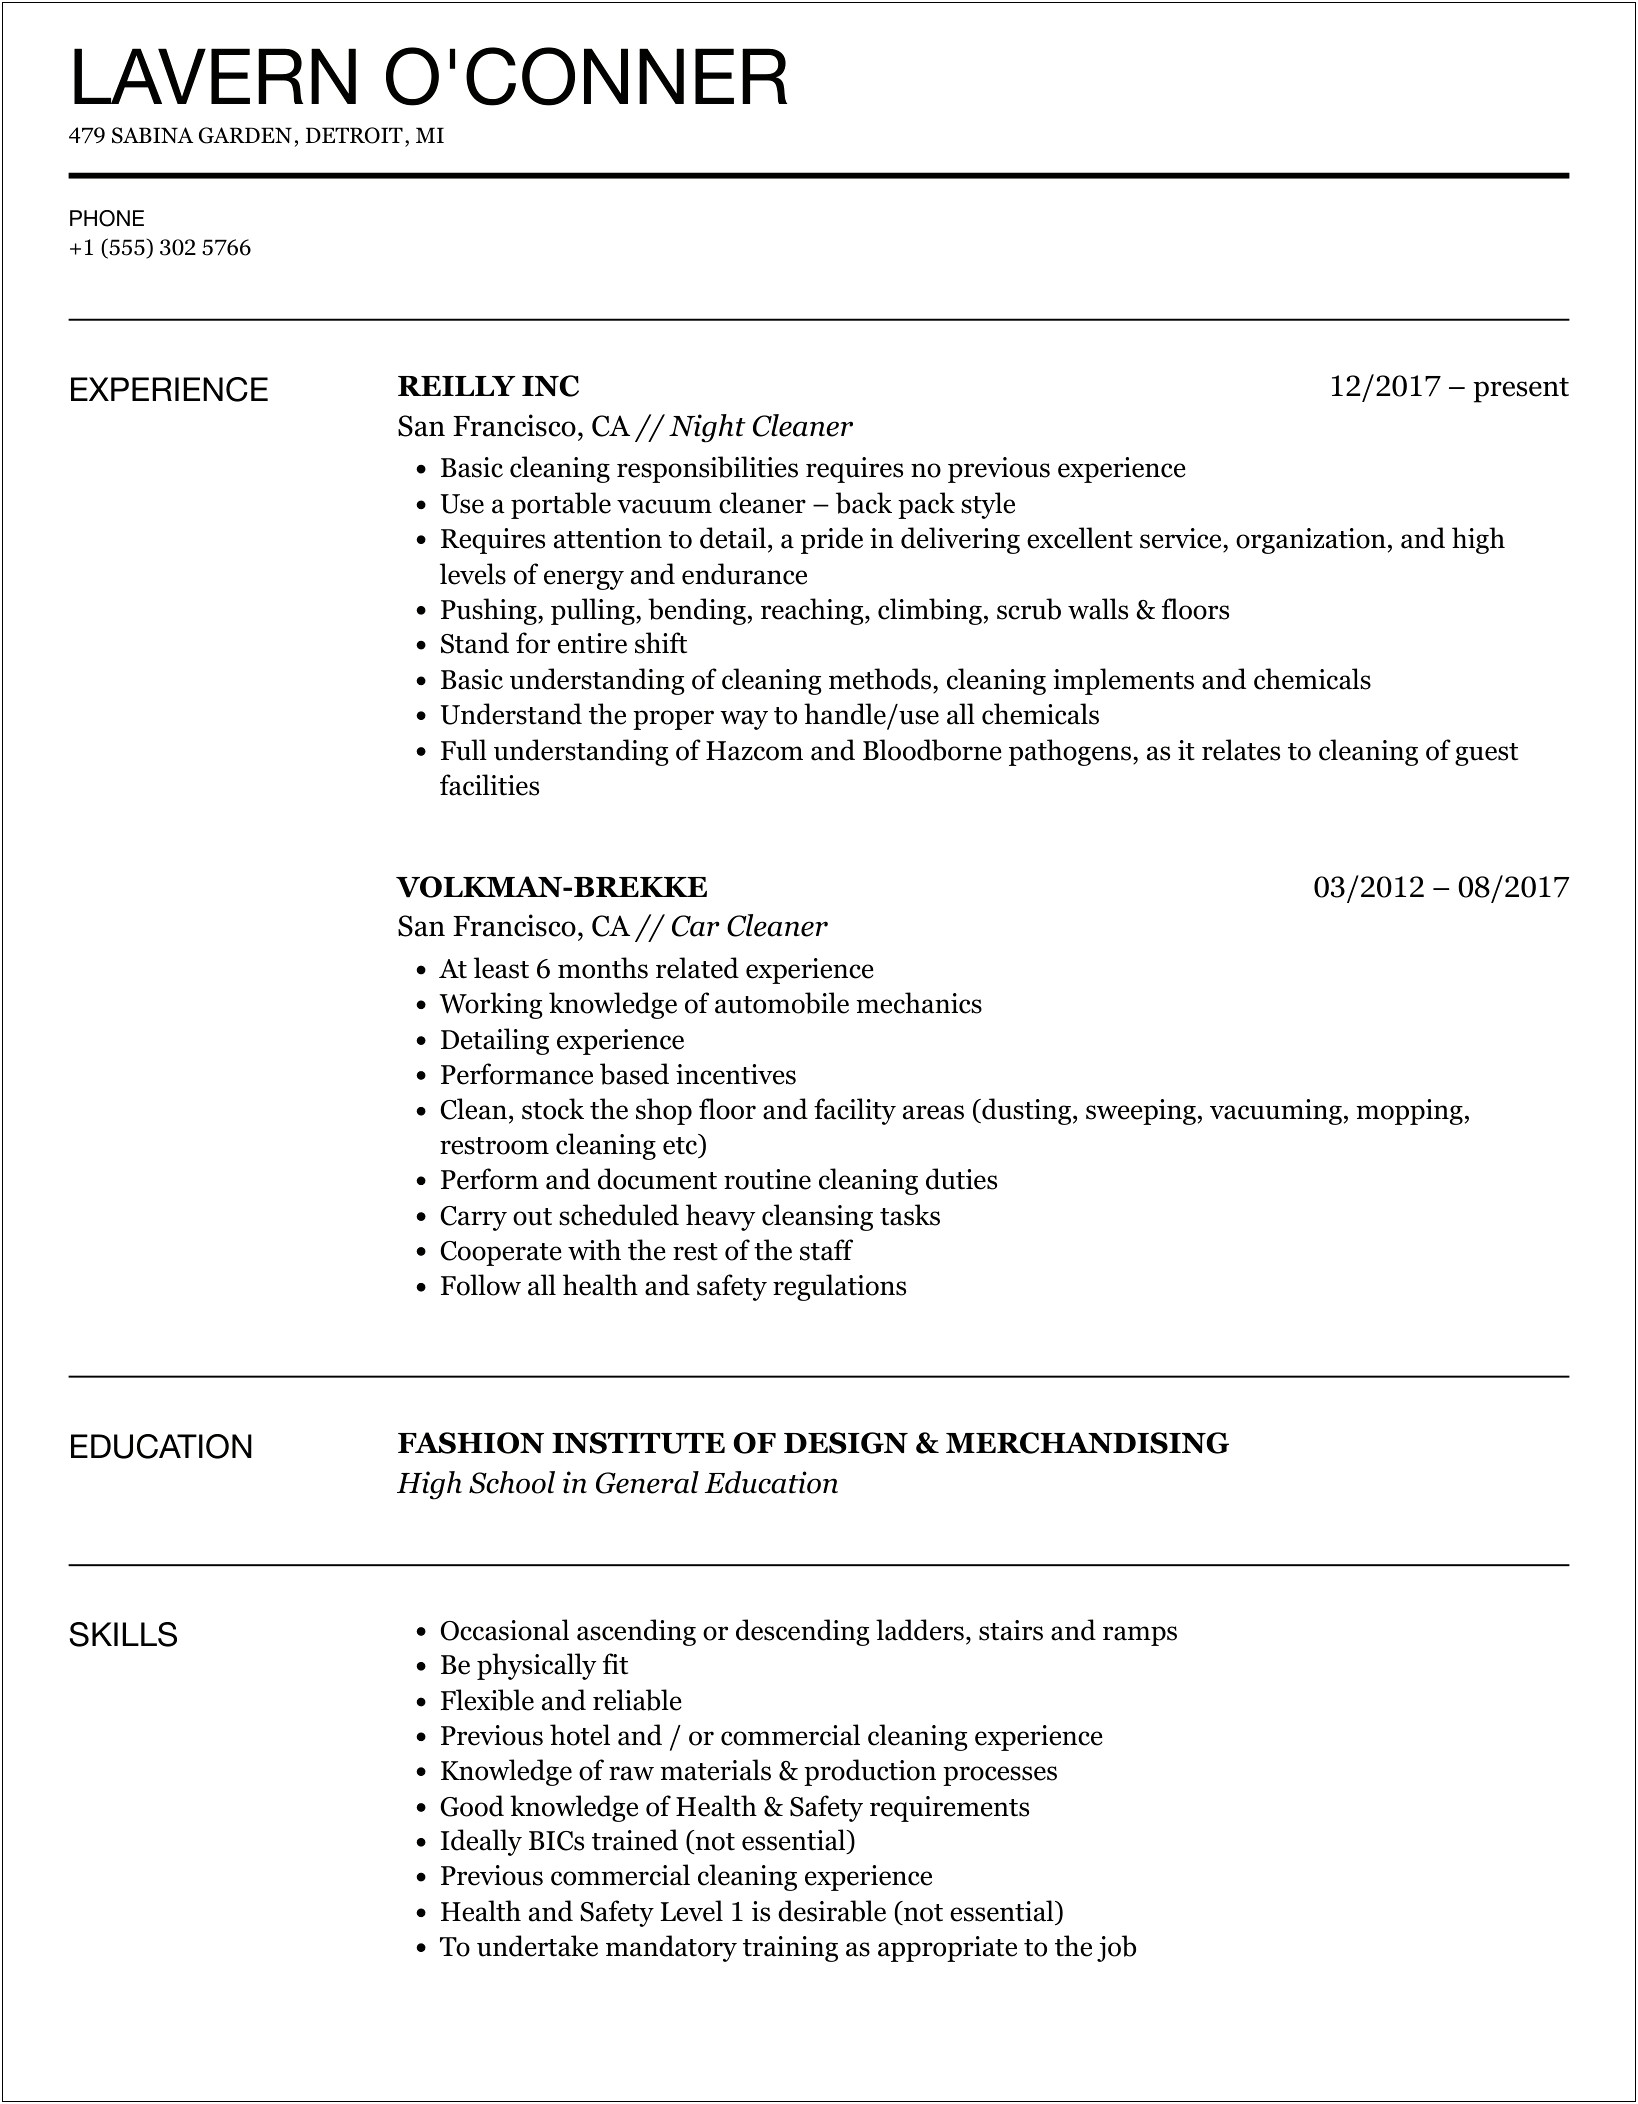 Wording Cleaning Job Well For Resume